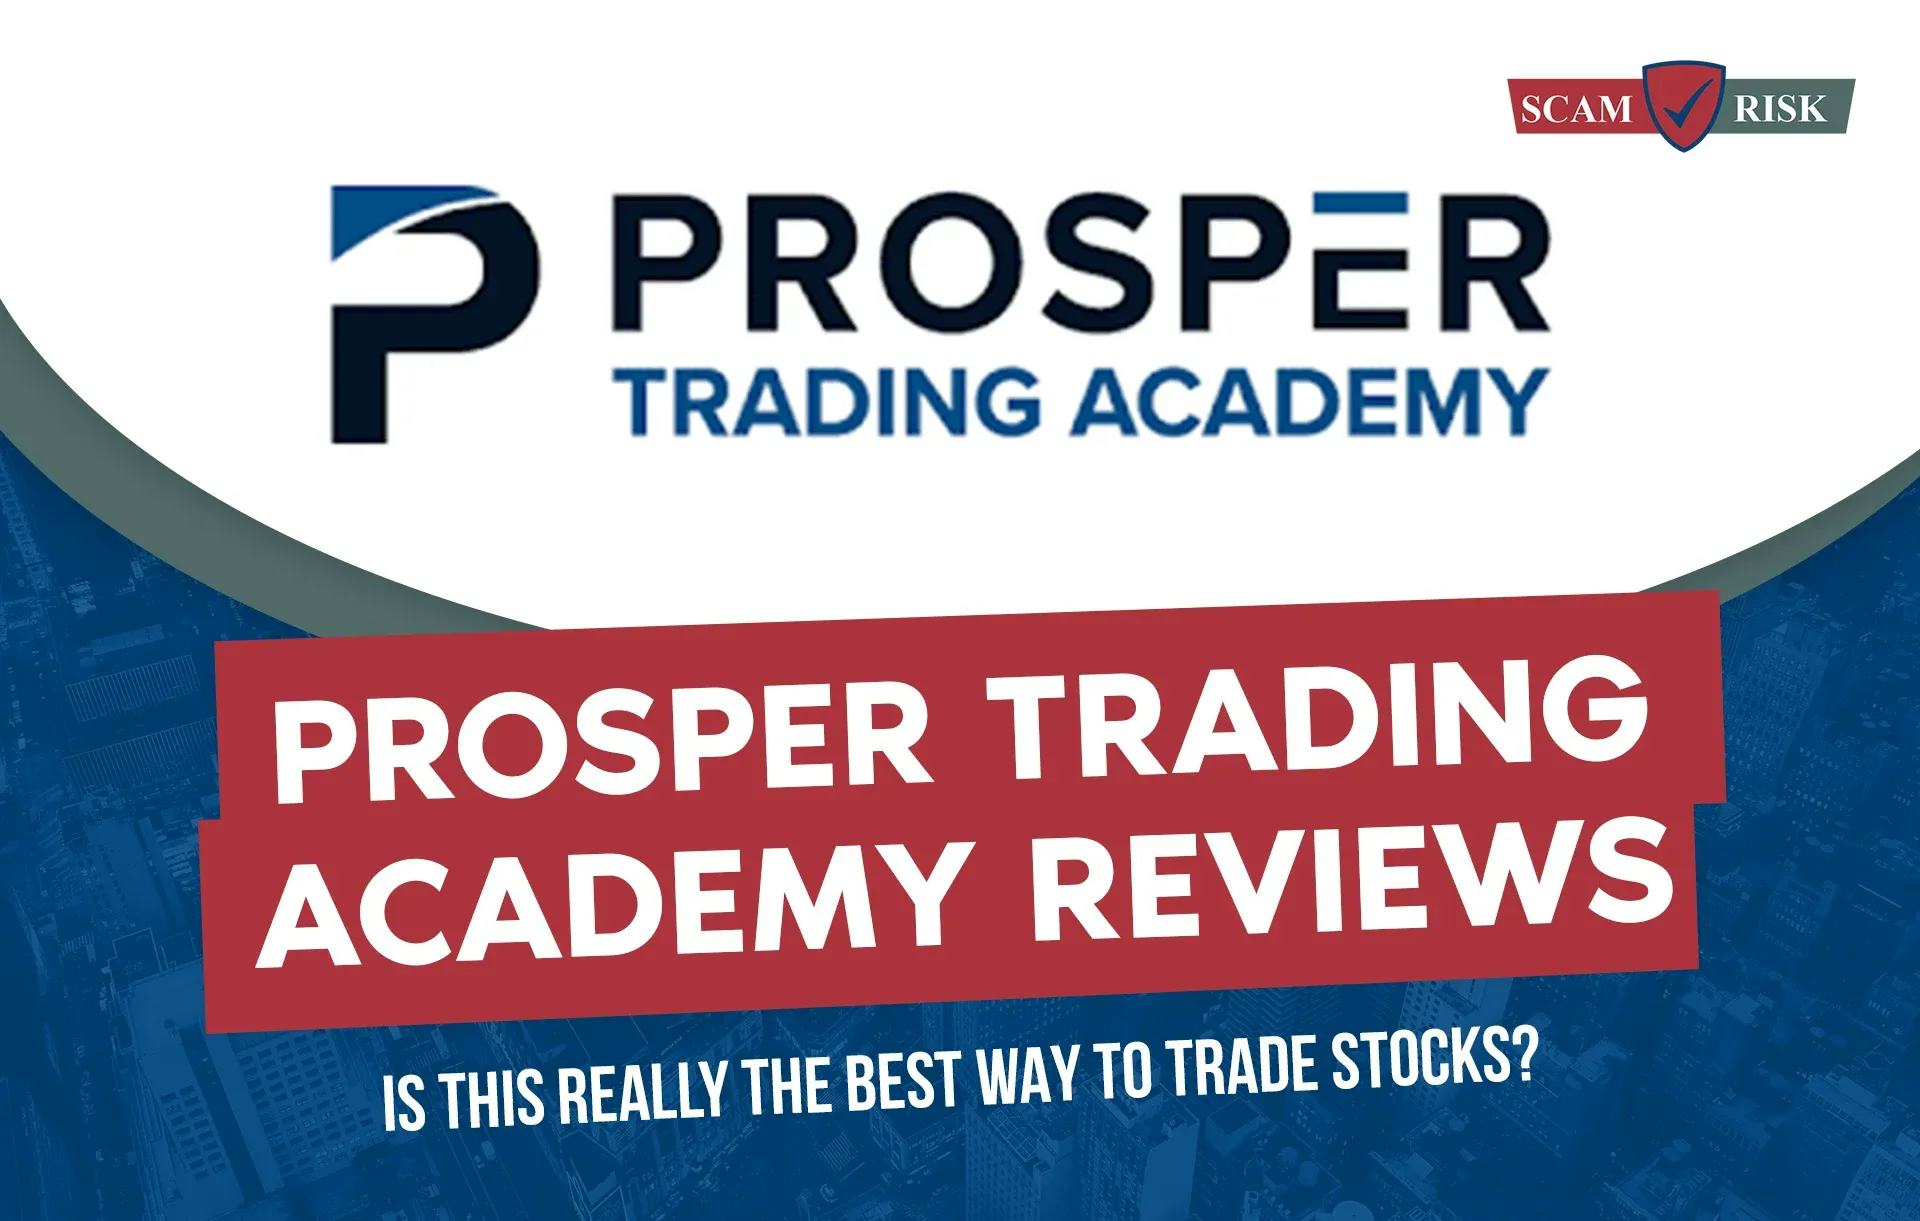 Prosper Trading Academy Reviews: Is It Worth It?